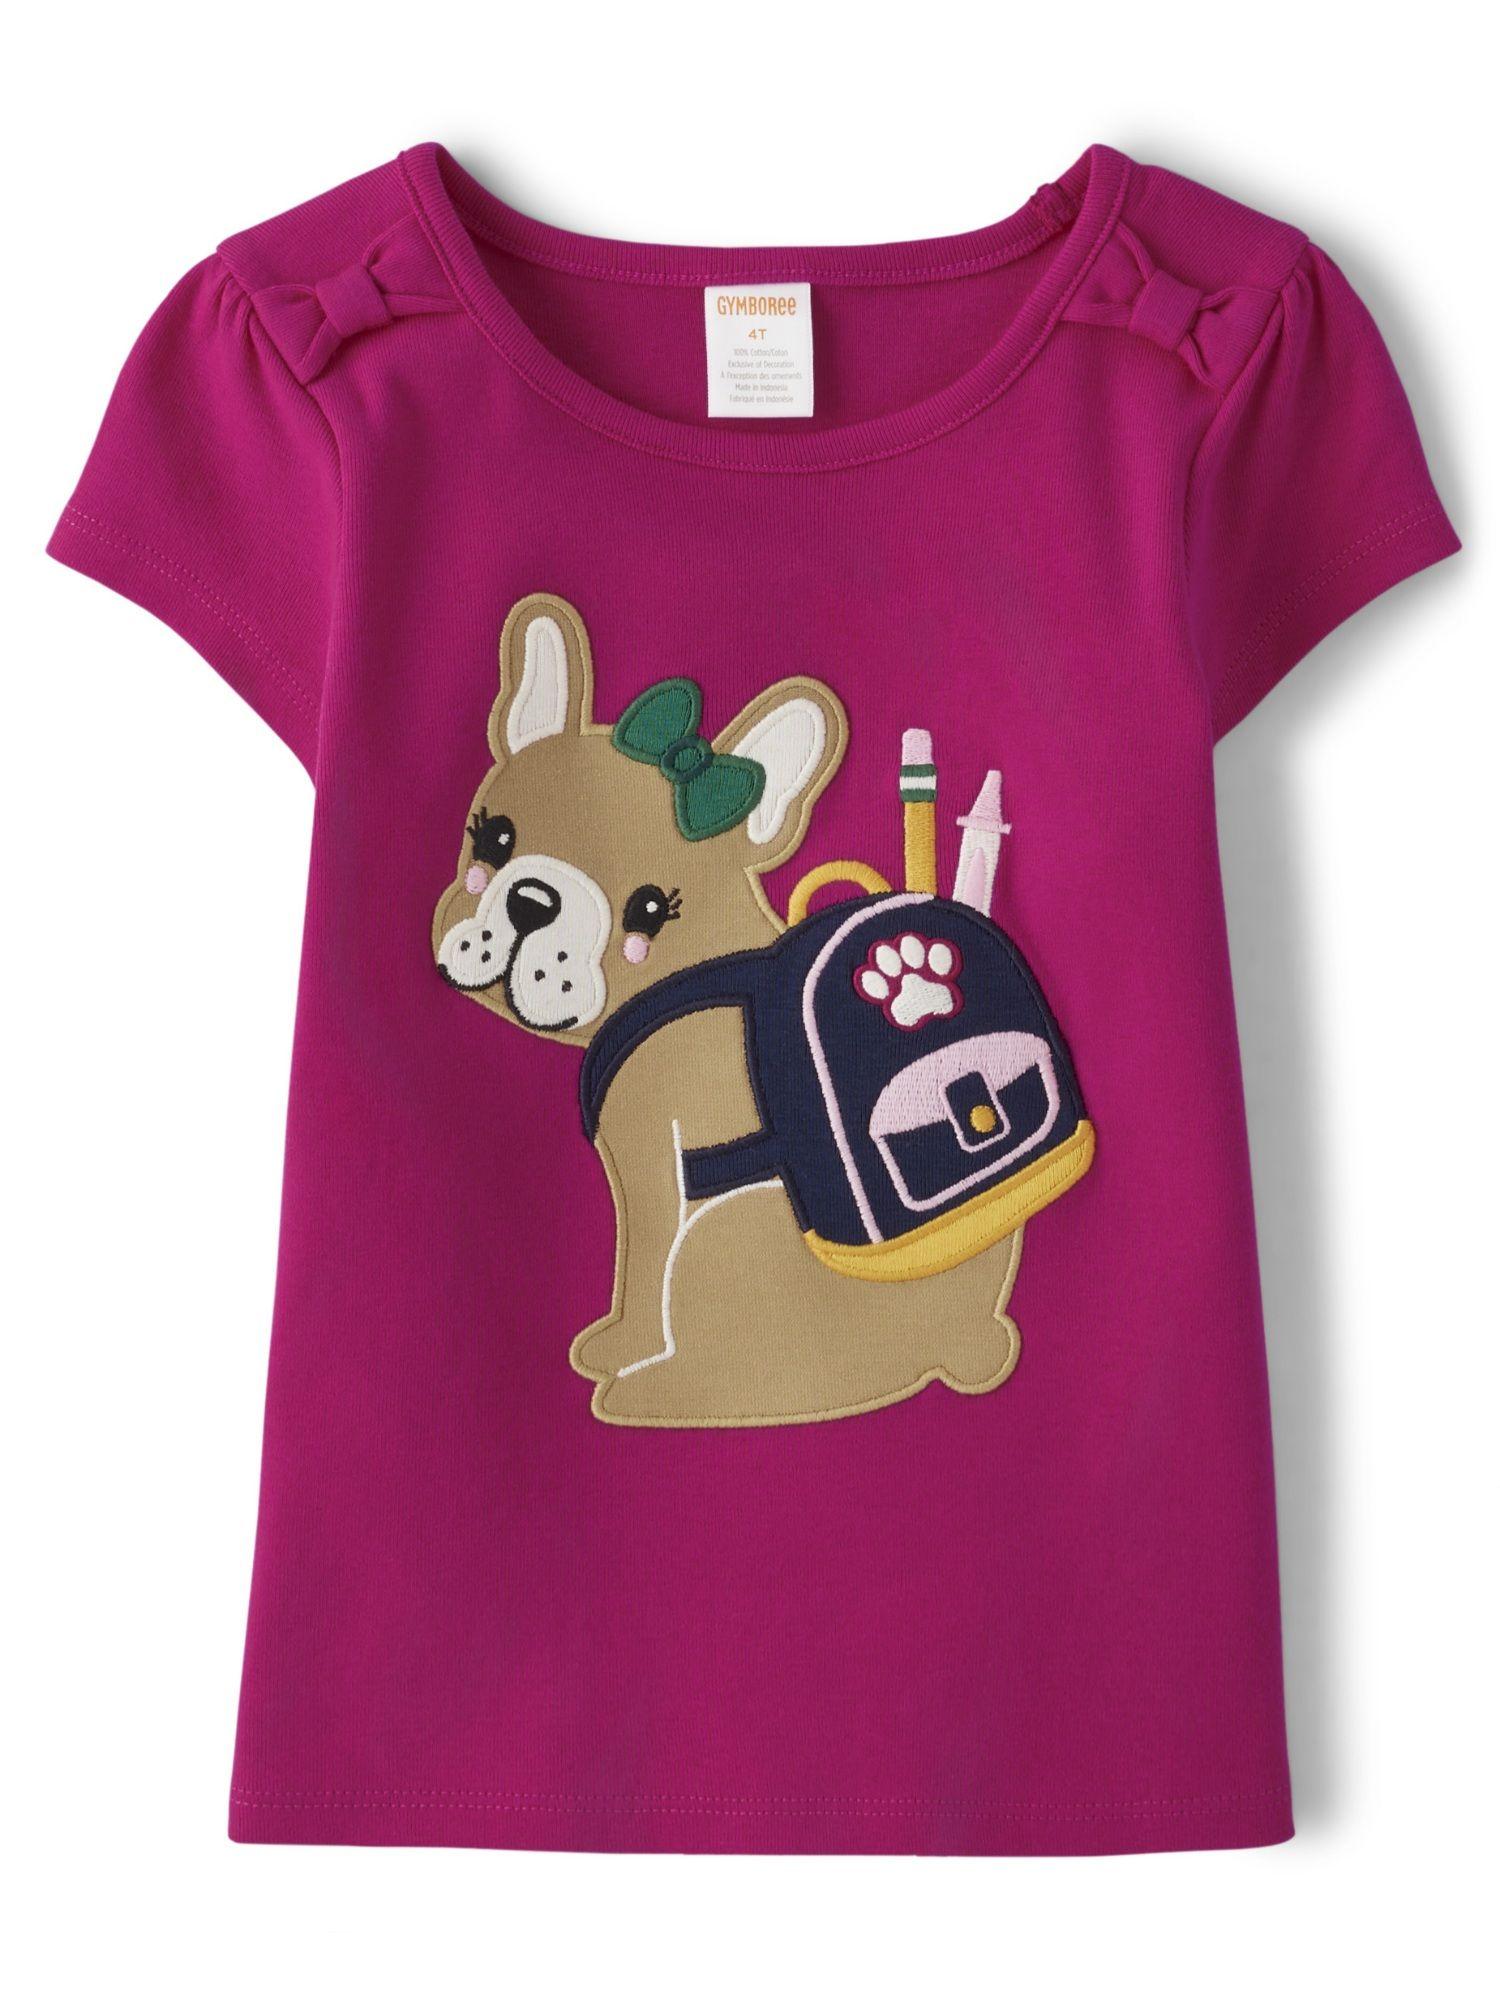 girls purple embroidered tops (5-6 years)